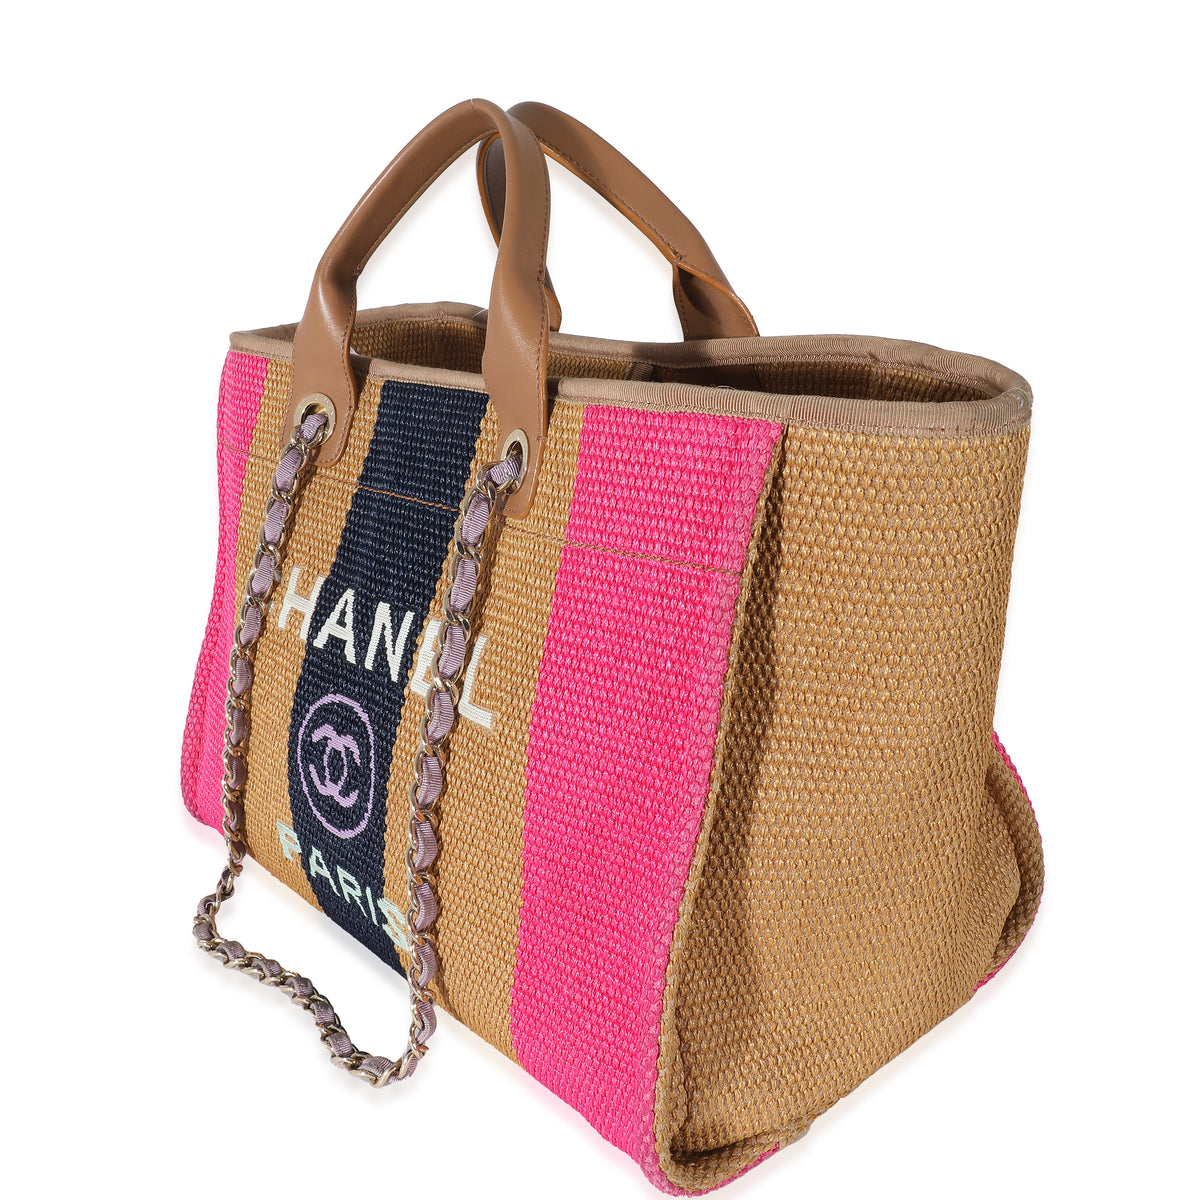 Striped Canvas Deauville Large Shopping Tote